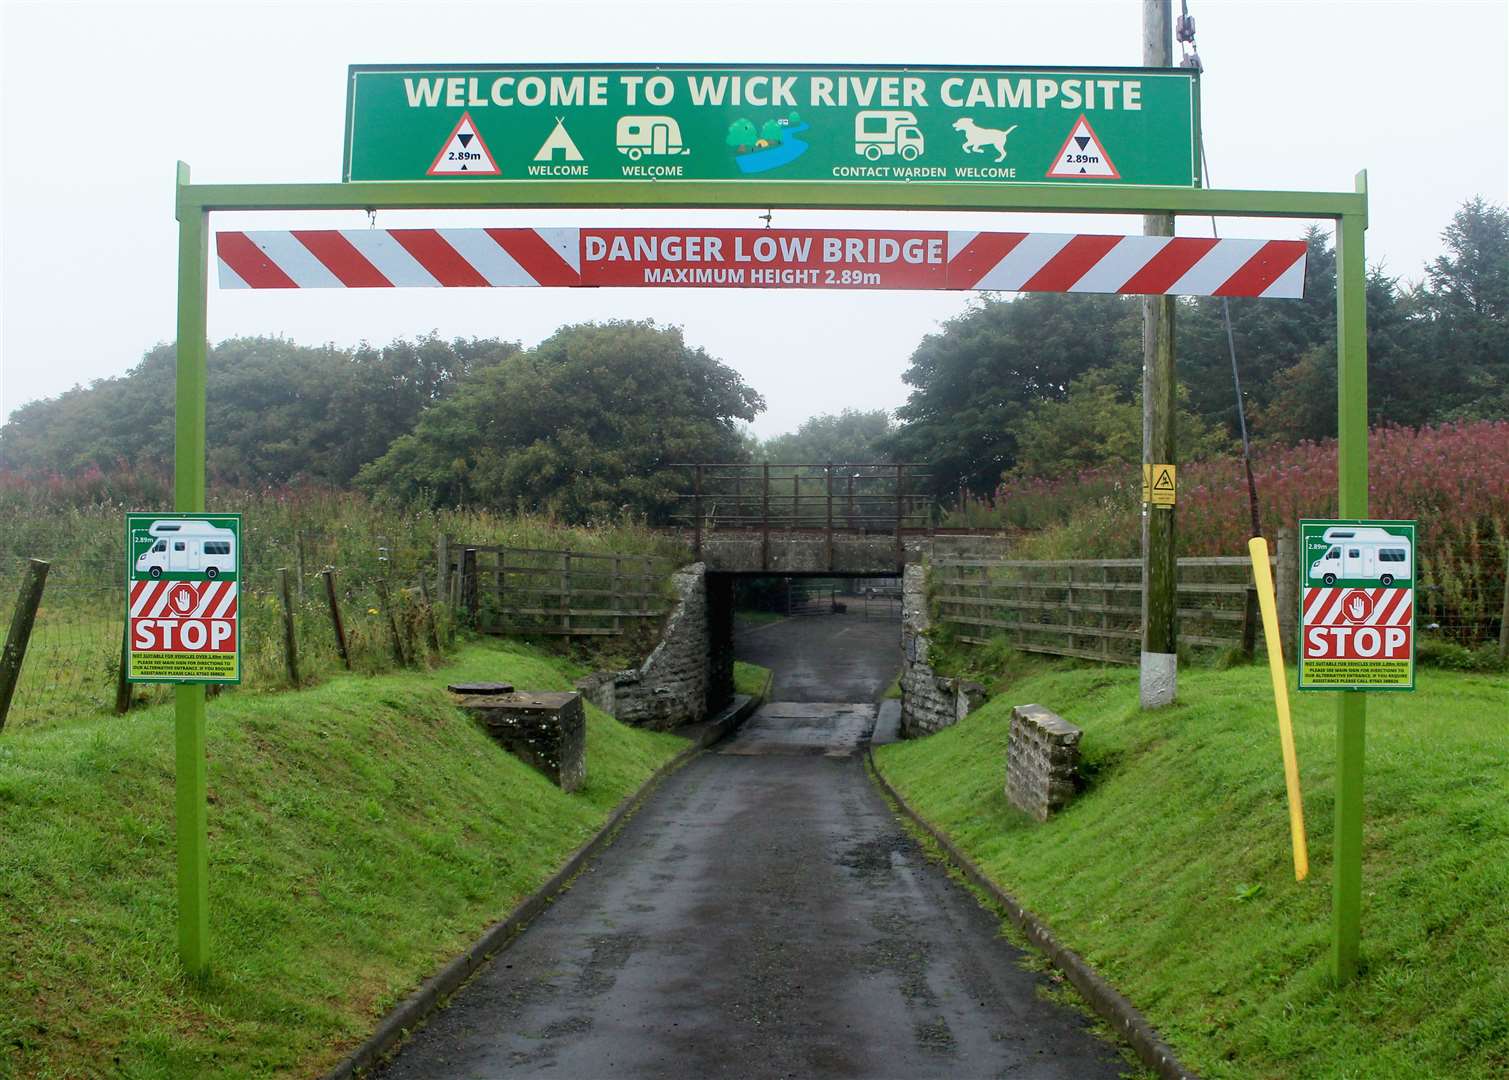 Additional signage has led to a reduction in the number of motorhomes hitting the railway bridge on the approach to Wick River Campsite.